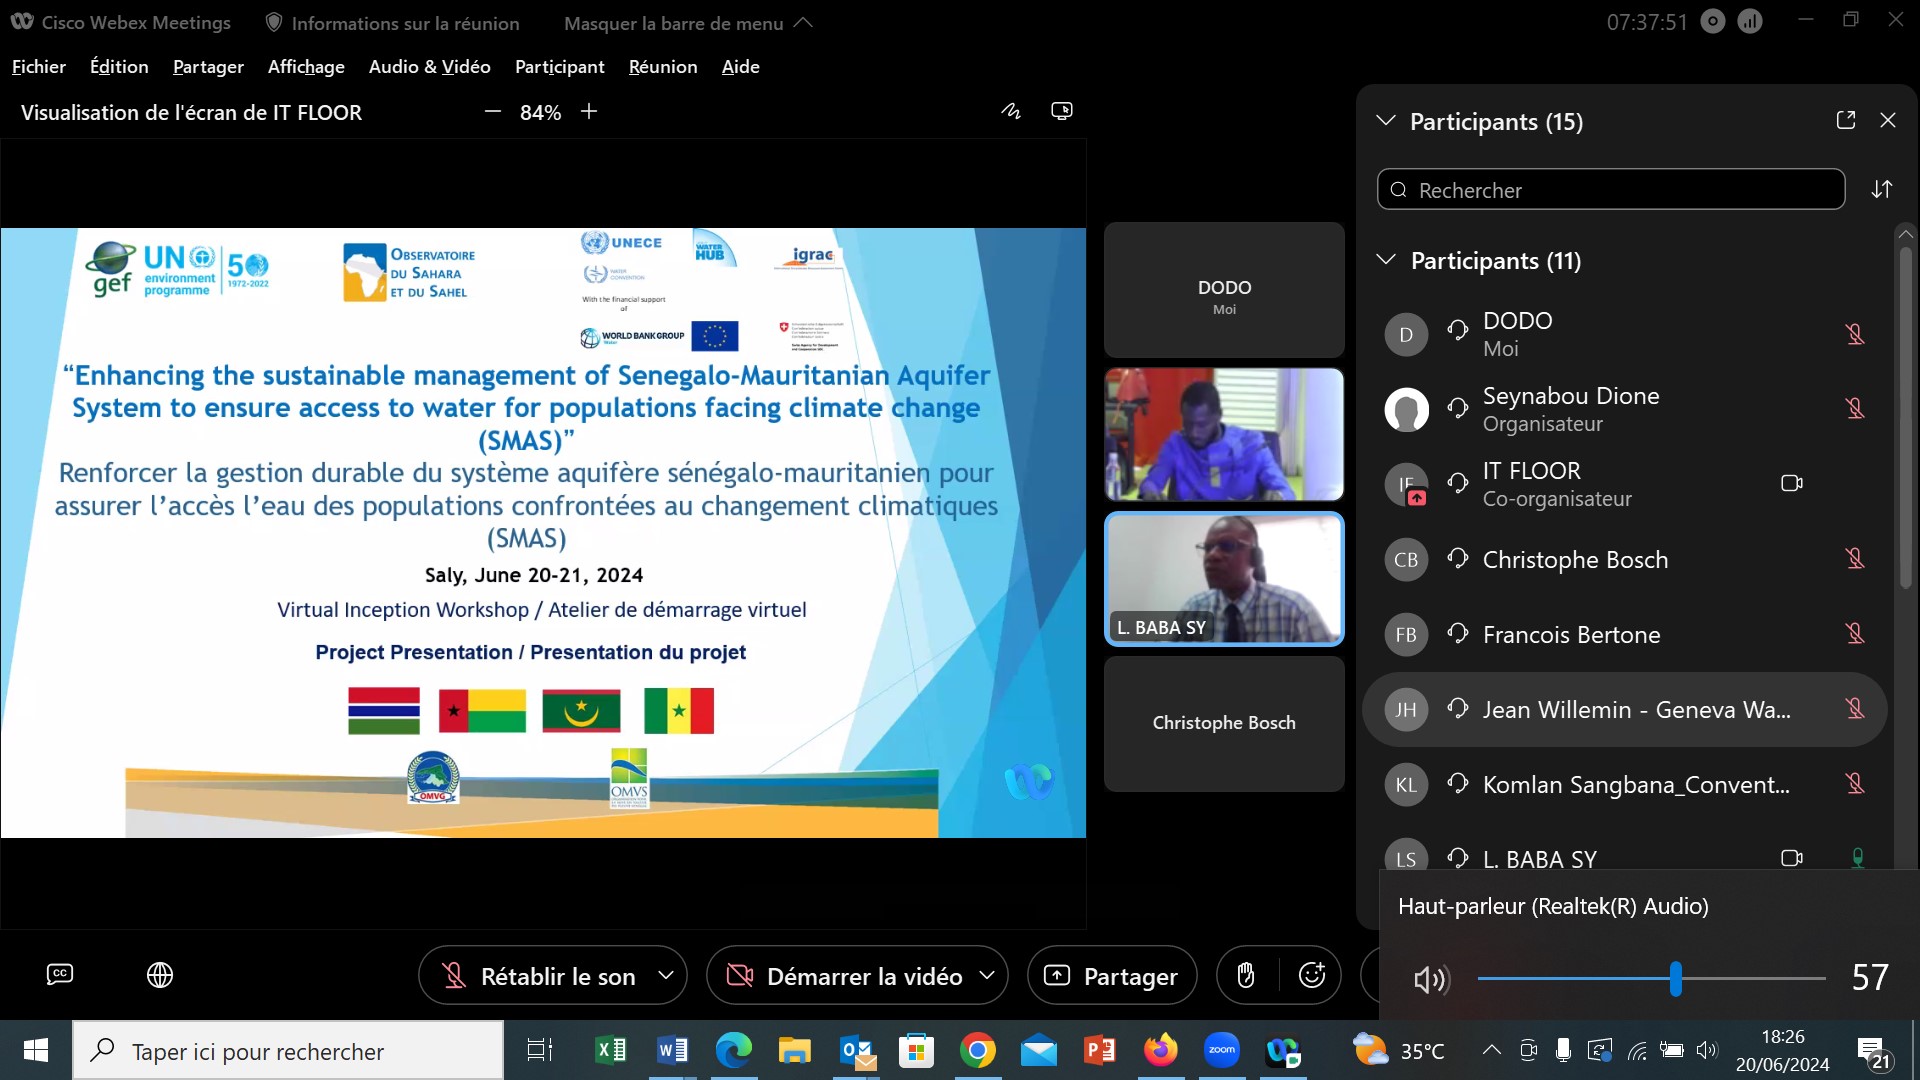  Joint Management of the Senegal-Mauritanian Aquifer Basin: Review of the SMAS Project Inception Phase and Regional Working Group Meeting